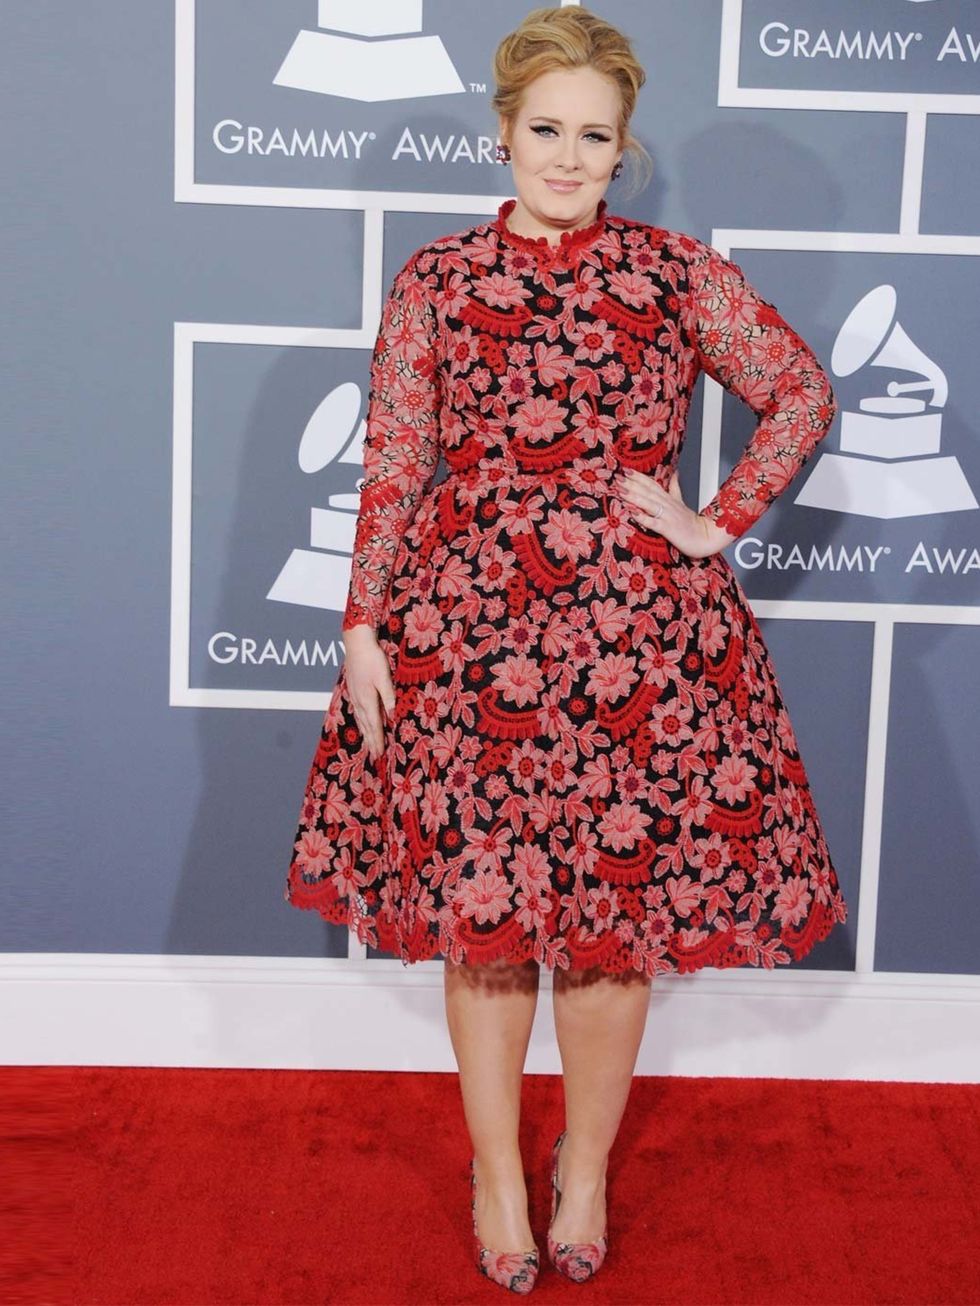 <p>Adele wore a floral print <a href="http://www.elleuk.com/catwalk/designer-a-z/valentino/autumn-winter-2013">Valentino</a> dress to pick up her ninth award from the The 55th Annual Grammy Awards at Staples Center in Los Angeles, February 2013.</p>